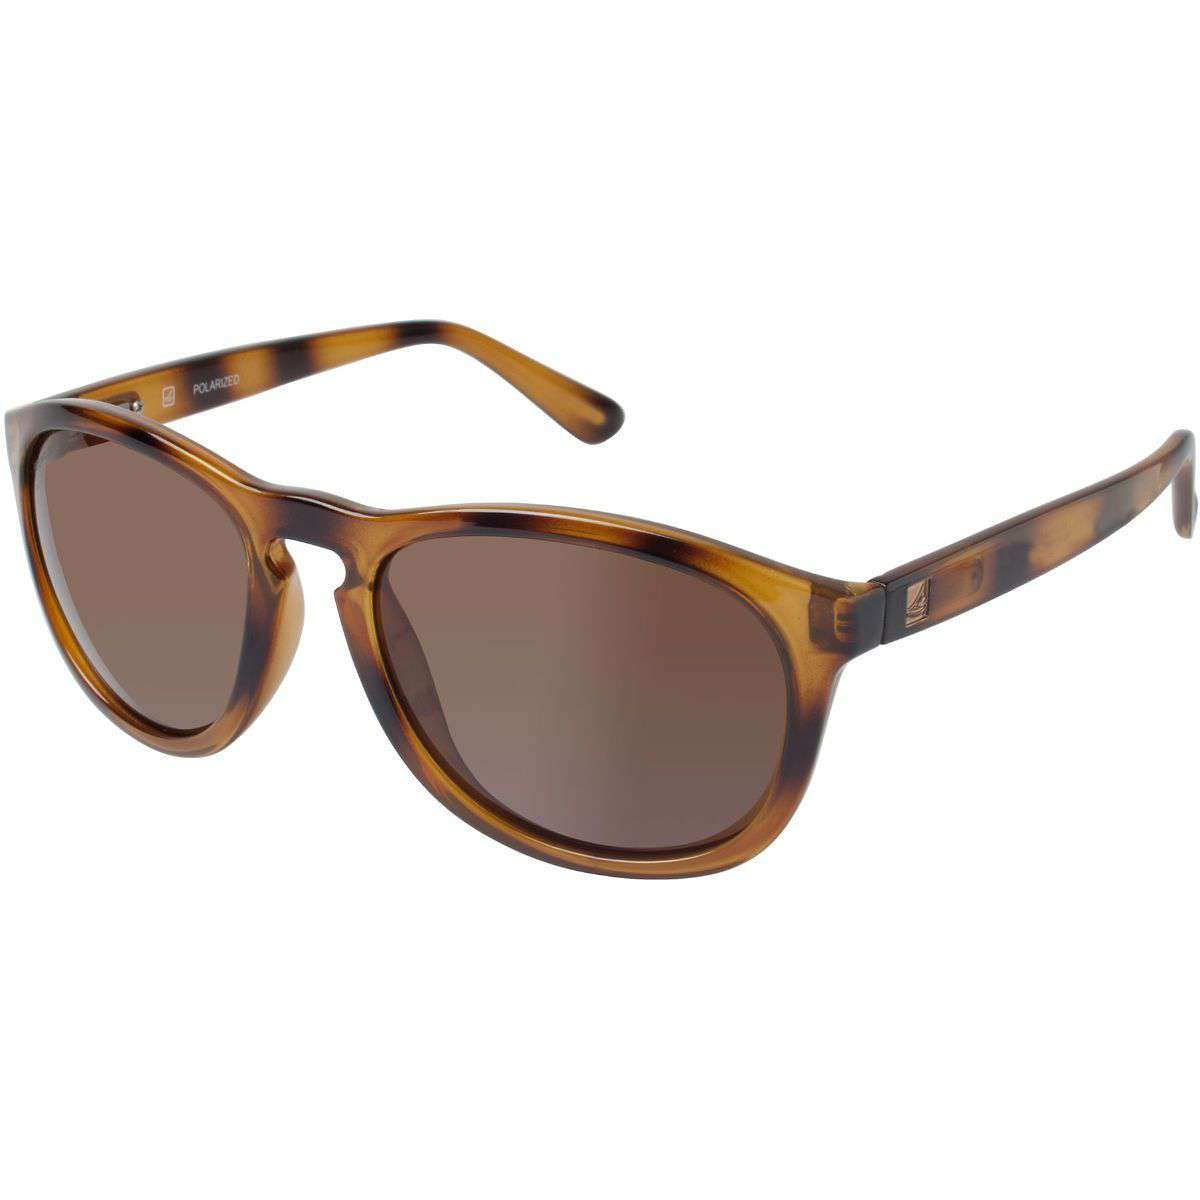 Fenwick Polarized Sunglasses in Brown and Tortoise Fade by Sperry - Country Club Prep